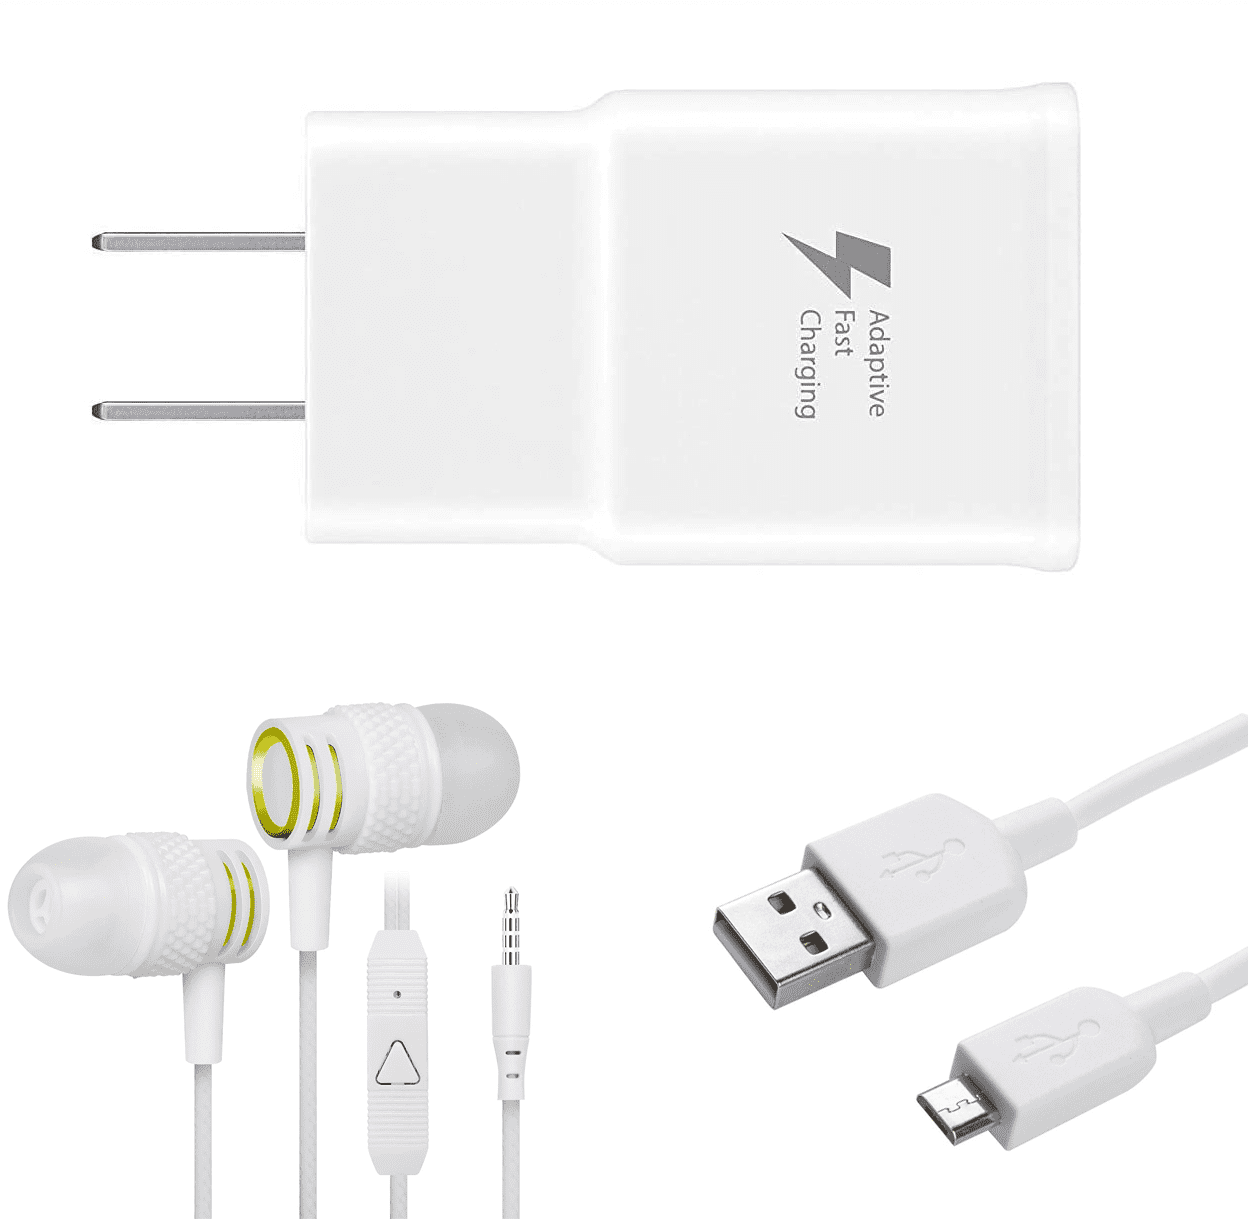 OEM EP-TA20JBEUGUS Inbox Replacement 15W Adaptive Fast Wall Charger for Xiaomi Redmi Note 4X Includes Fast Charging 10FT Micro USB Charging Cable, and 3.5mm Earphone with Mic 3 Items Bundle